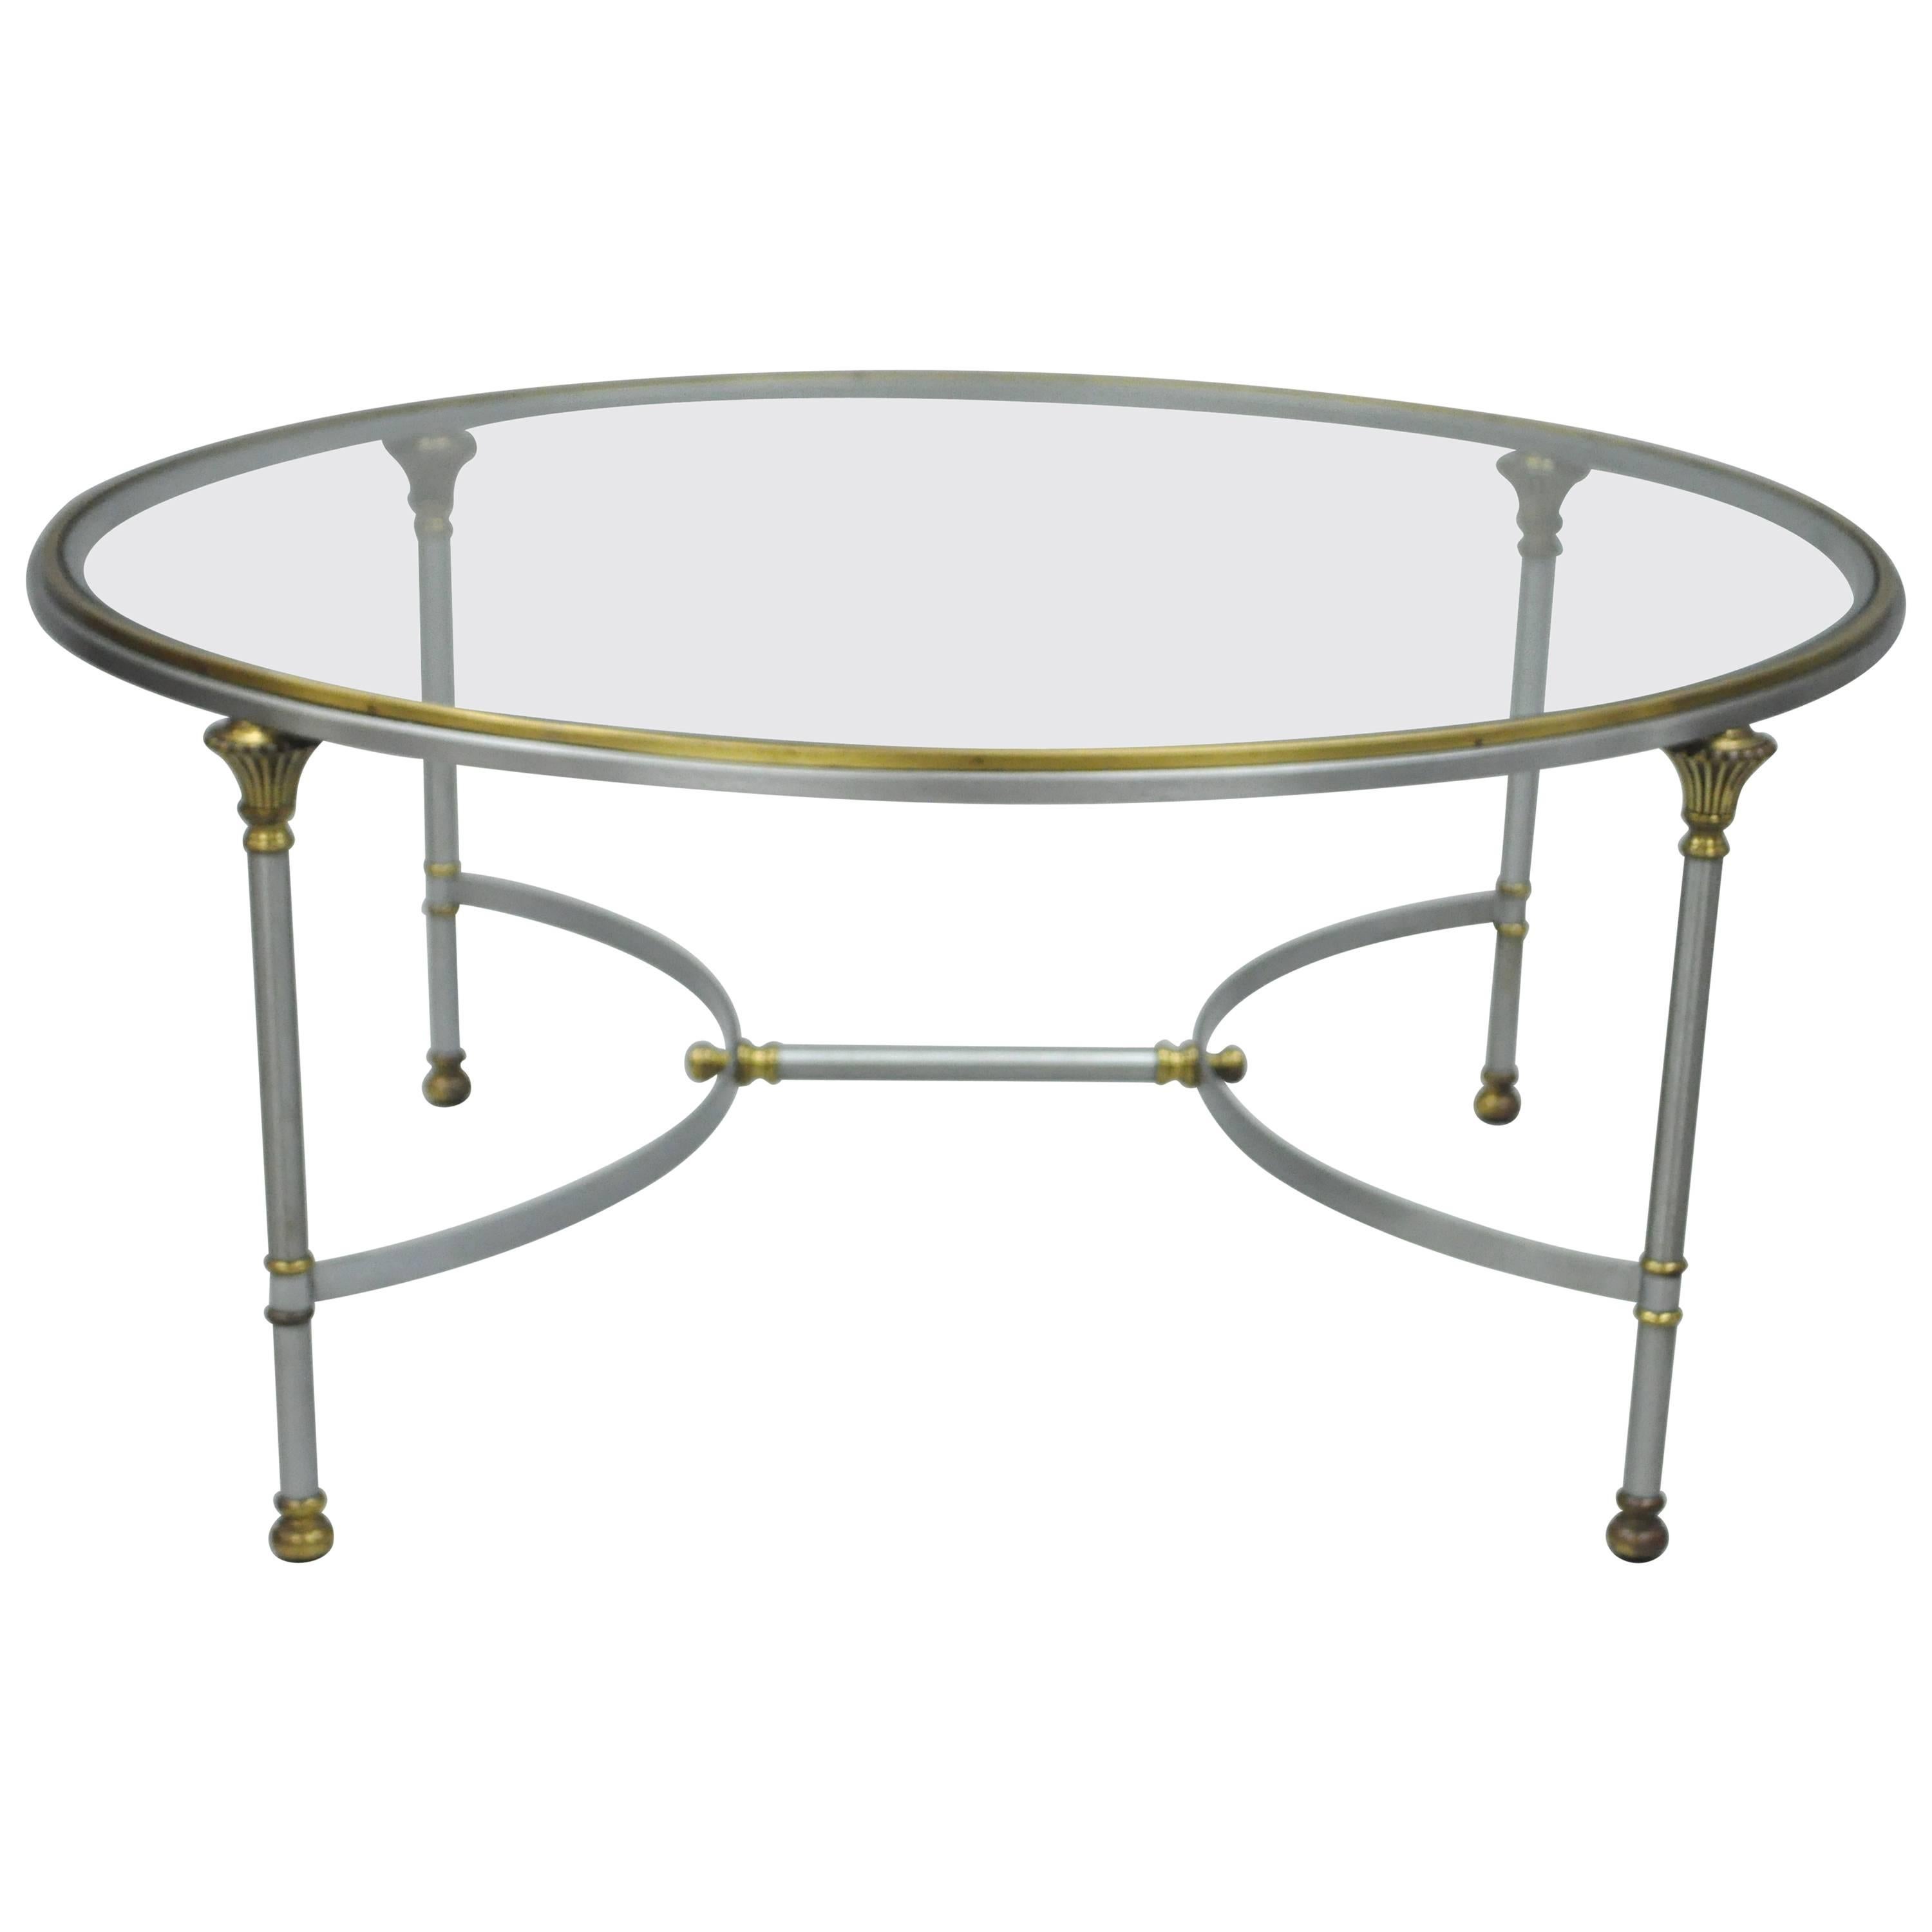 Italian Steel & Brass Round Directoire Neoclassical Coffee Table after Jansen For Sale